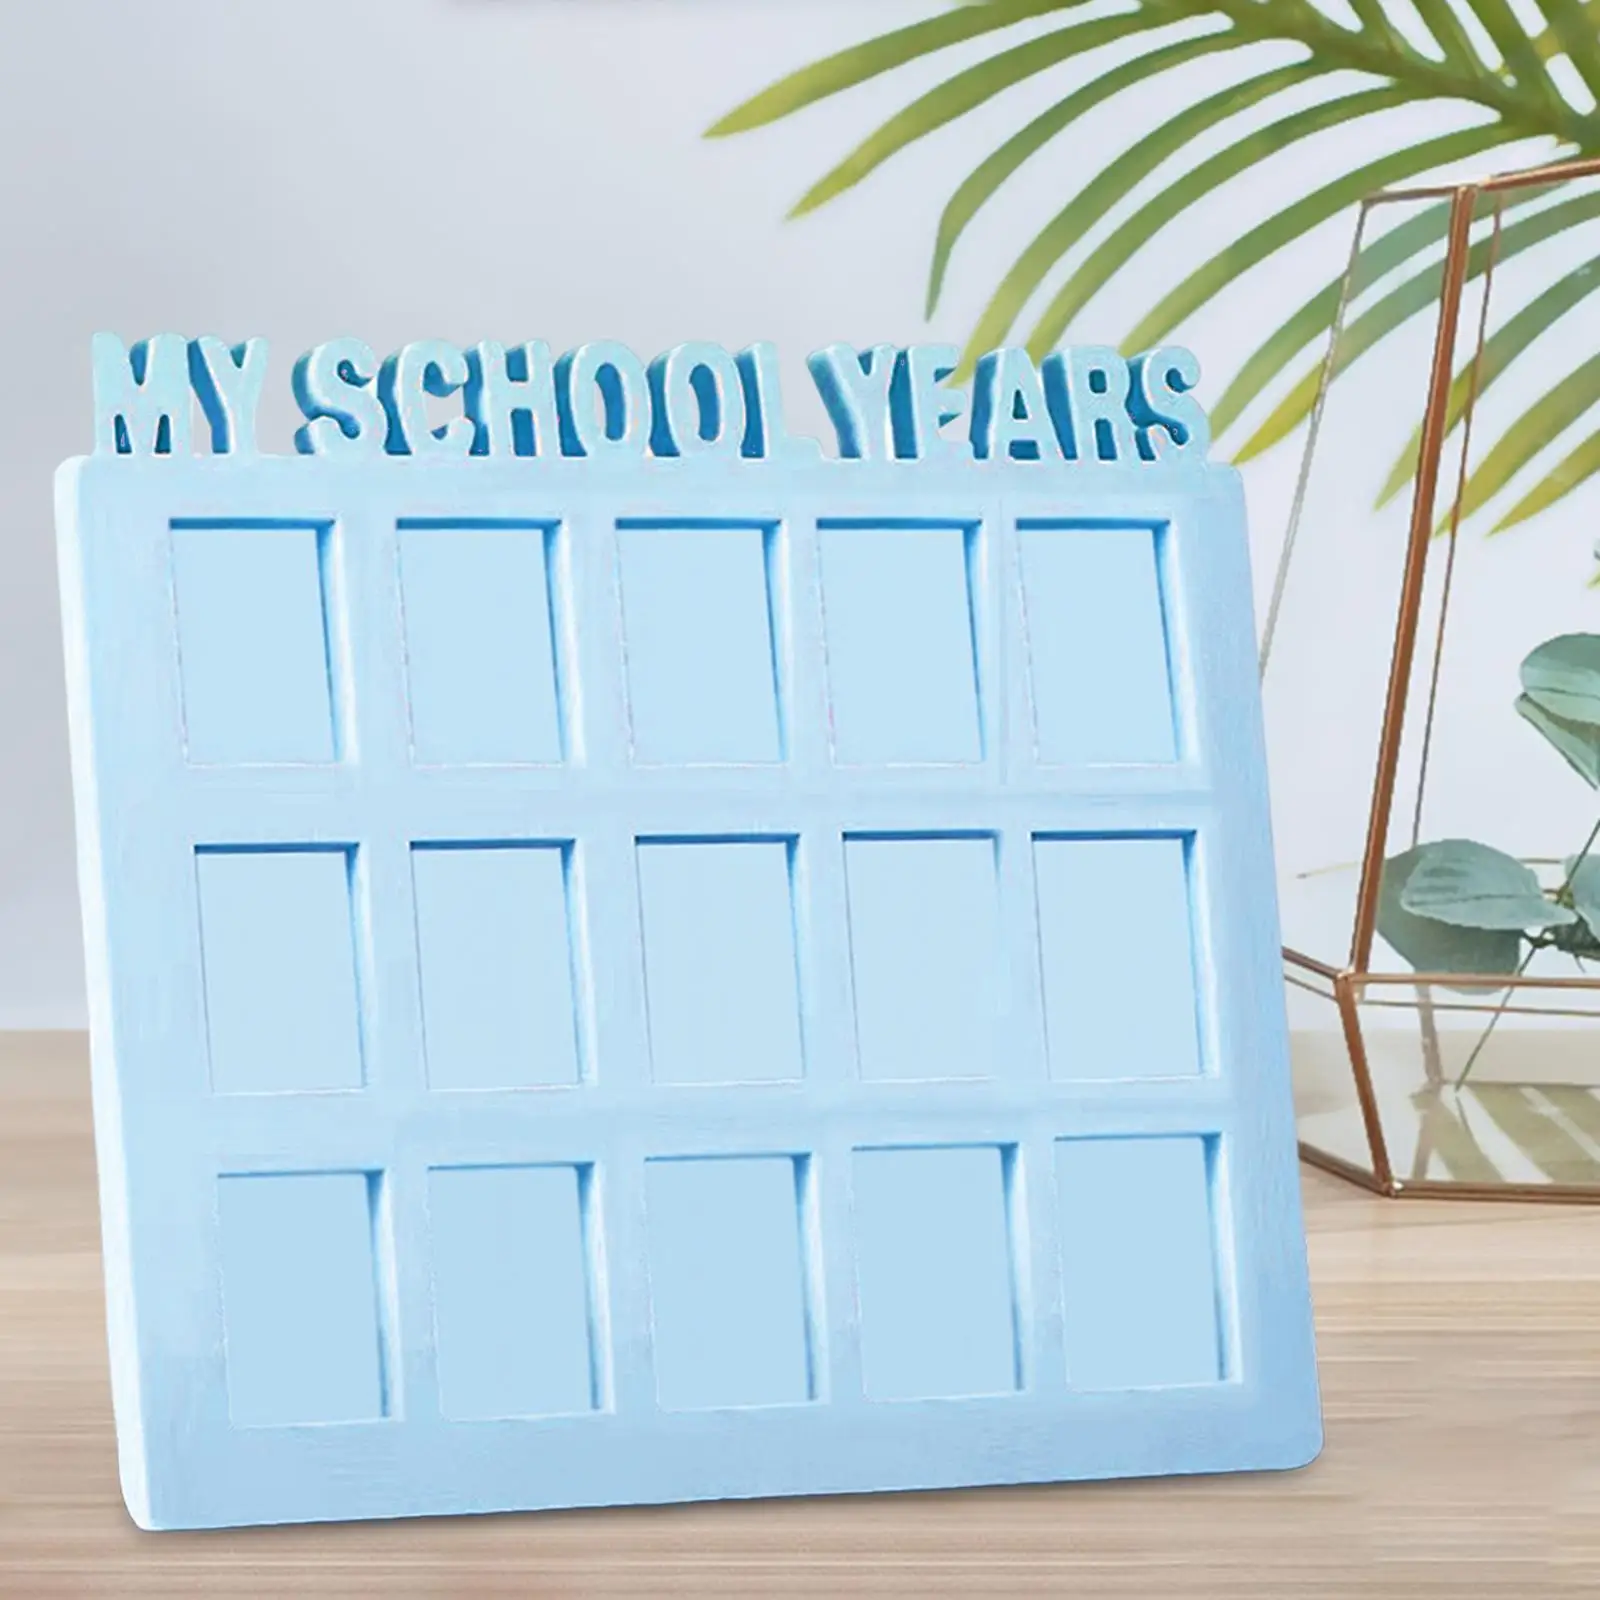 School Years Picture Frame, Displays 15 1.6x2 Pictures12 Photo Collage